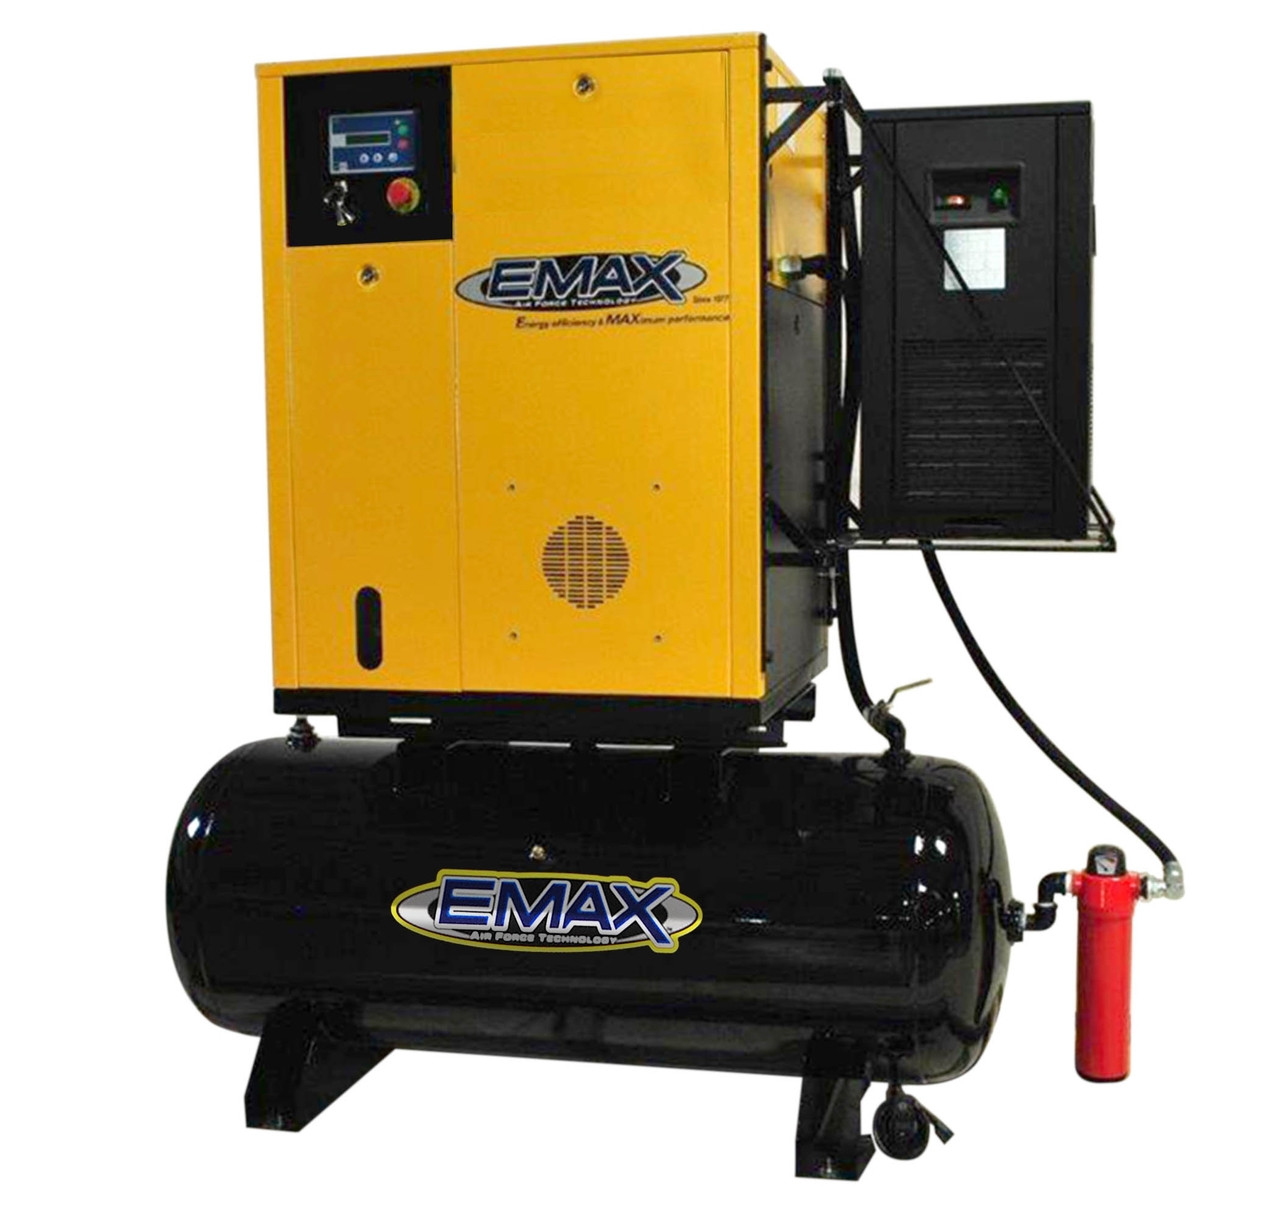 Emax ERSK150003 230 Volt 15 HP Three Phase Rotary Screw Air Compressor with Dryer